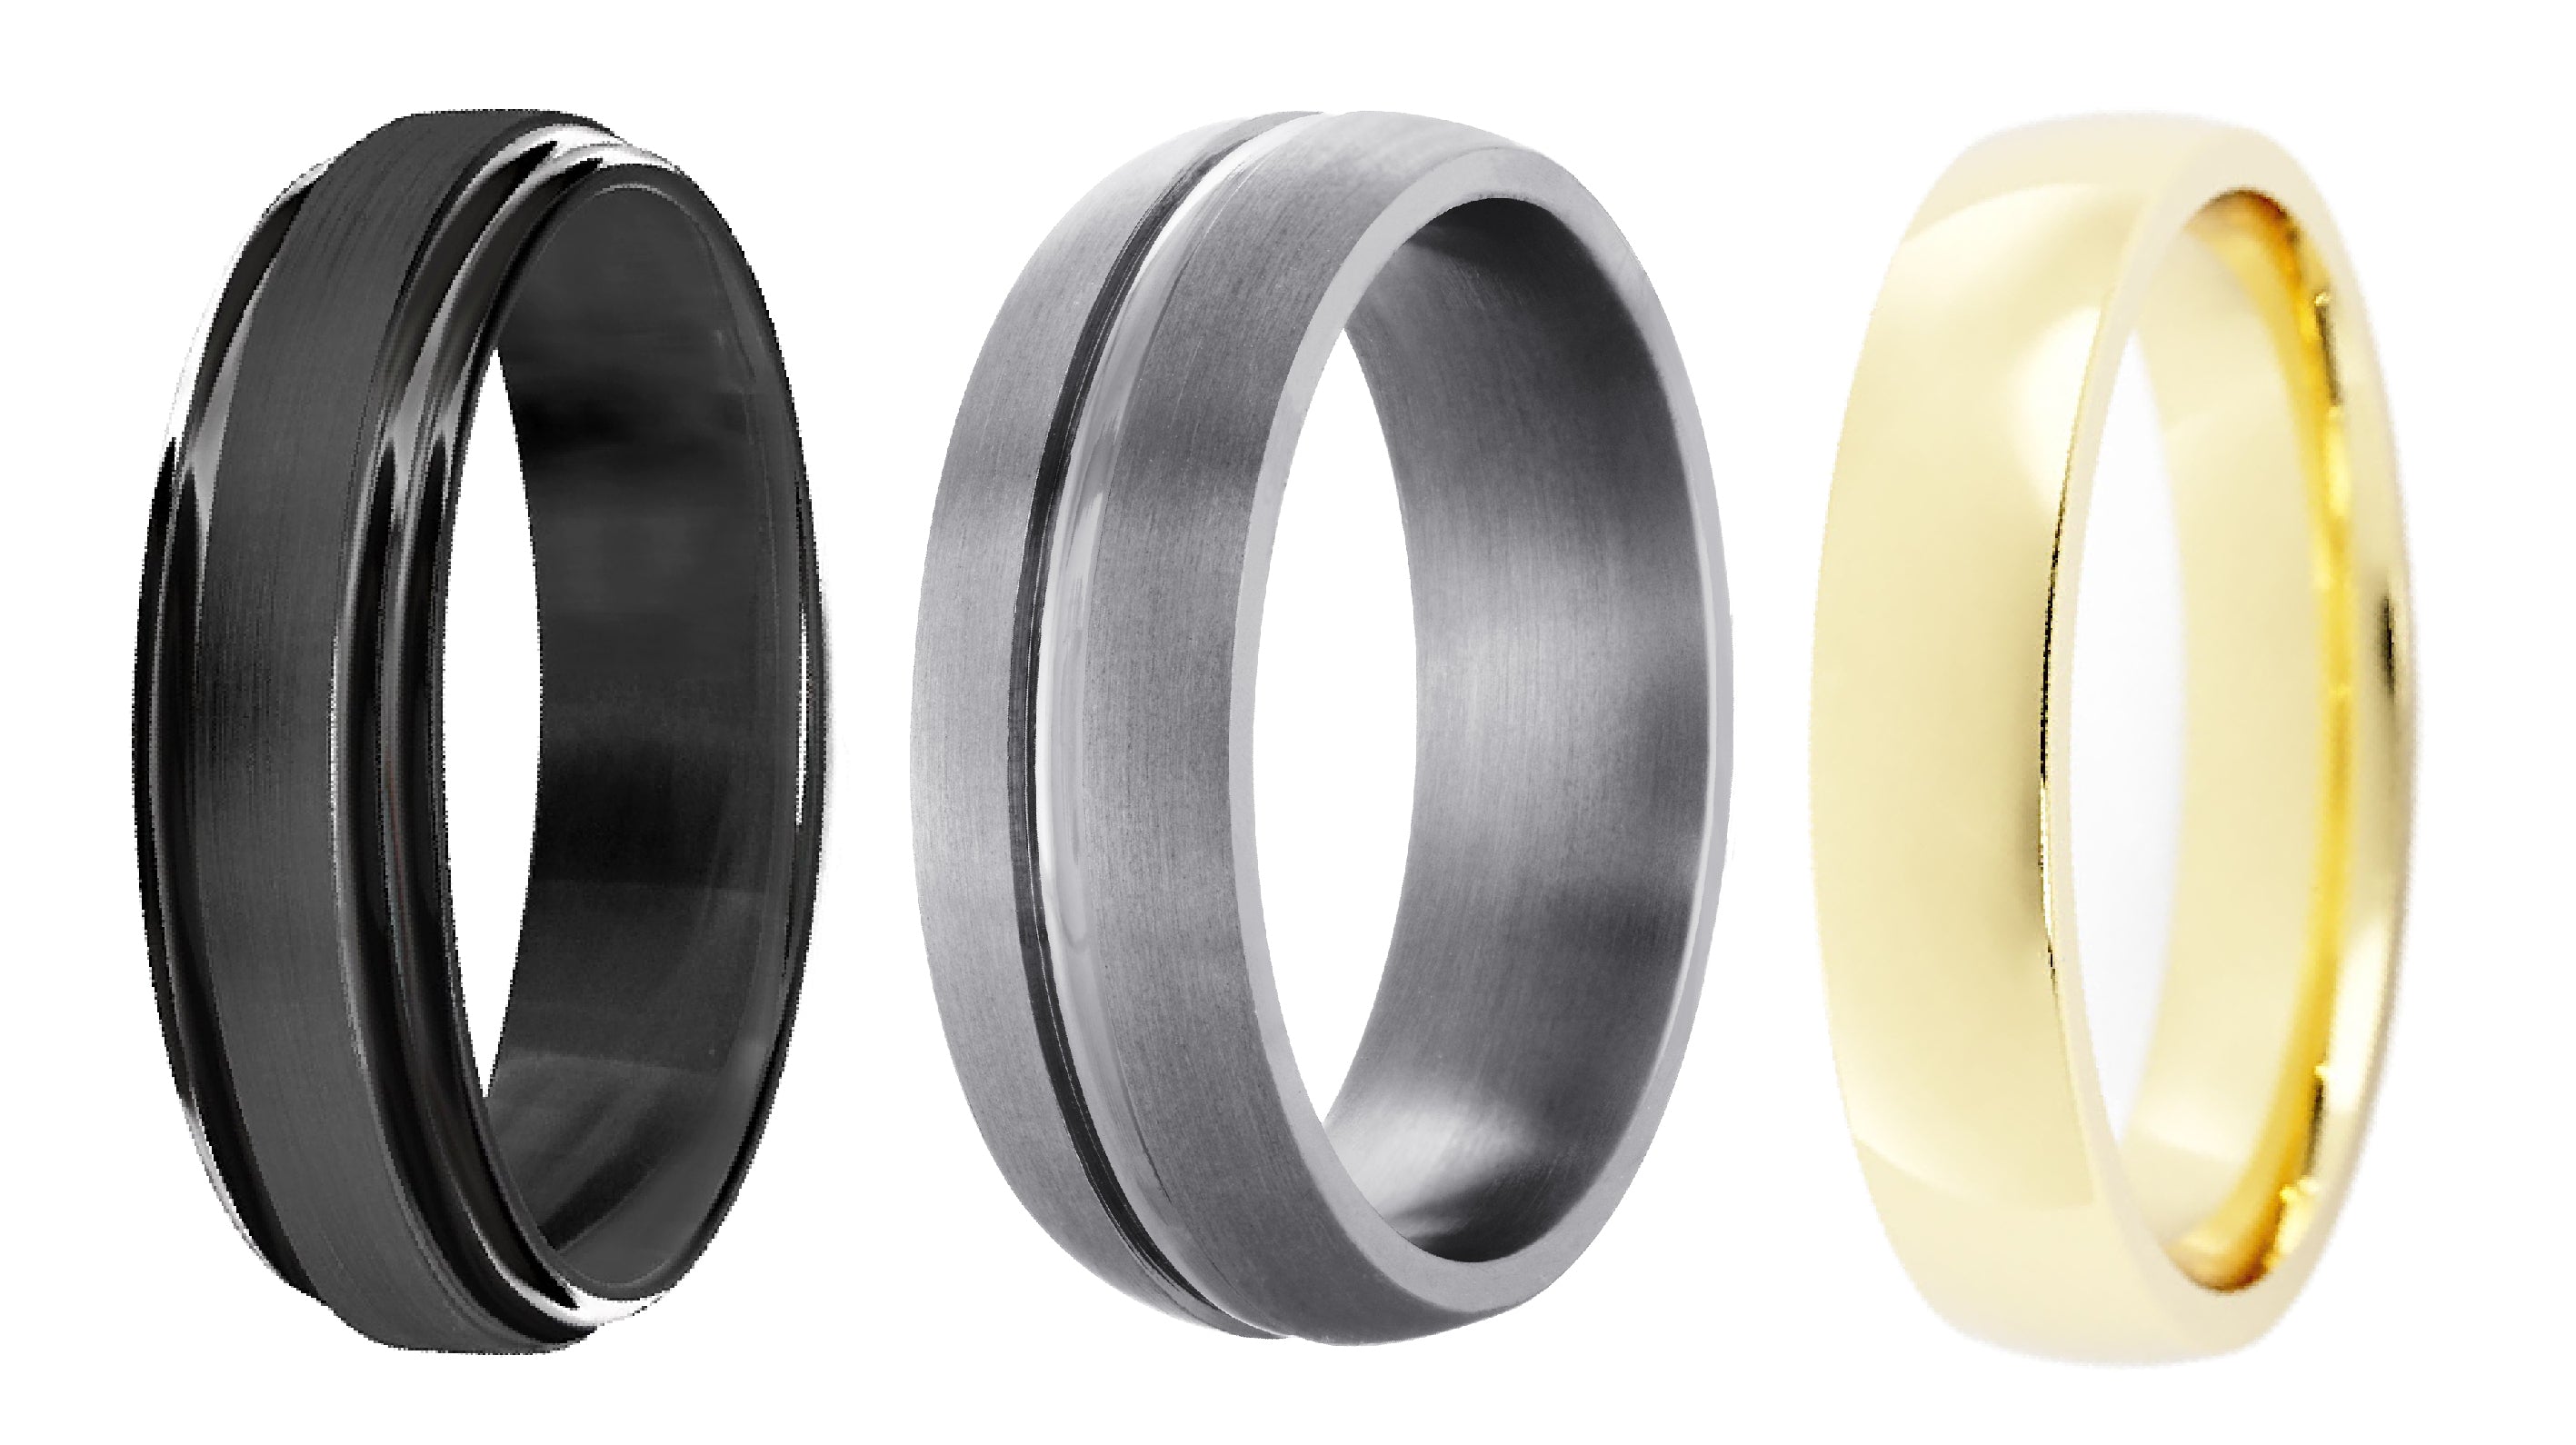 What Is The Best Material For Wedding Bands?